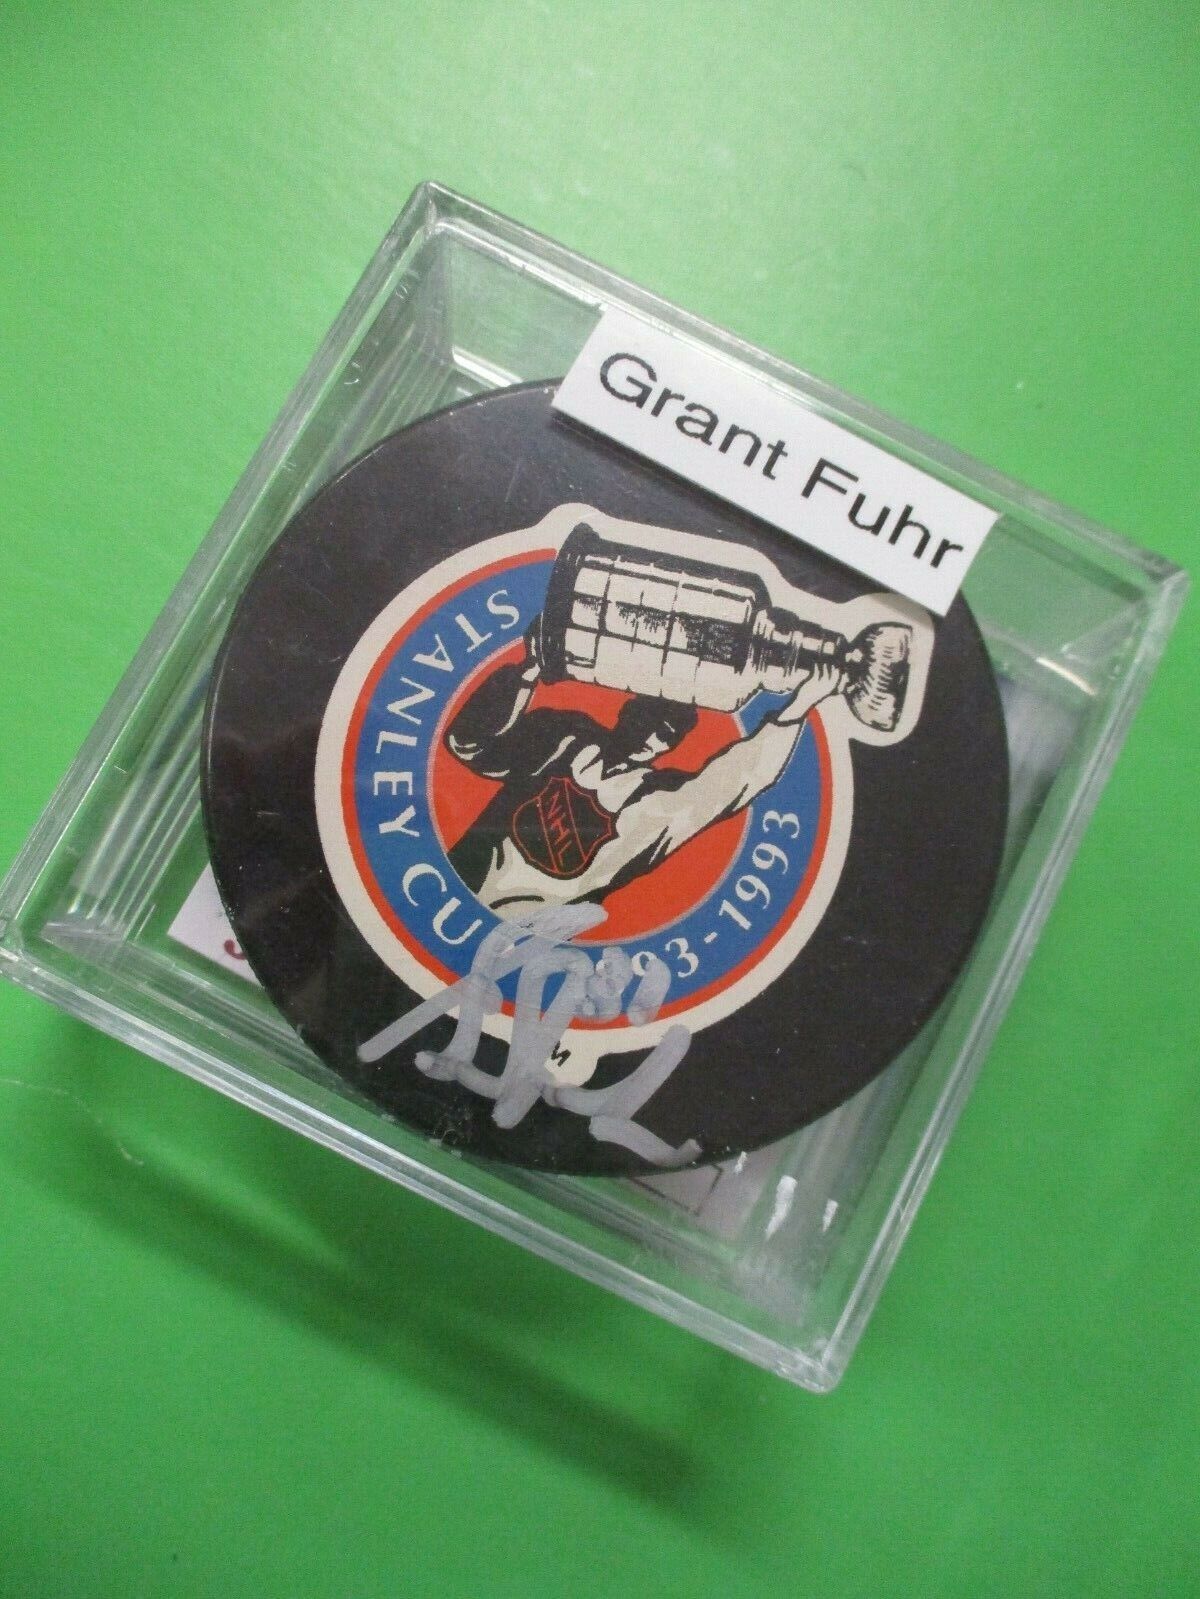 Grant Fuhr 1993 Official Game Puck Sign Autographed NHL Licensed Hockey with JSA